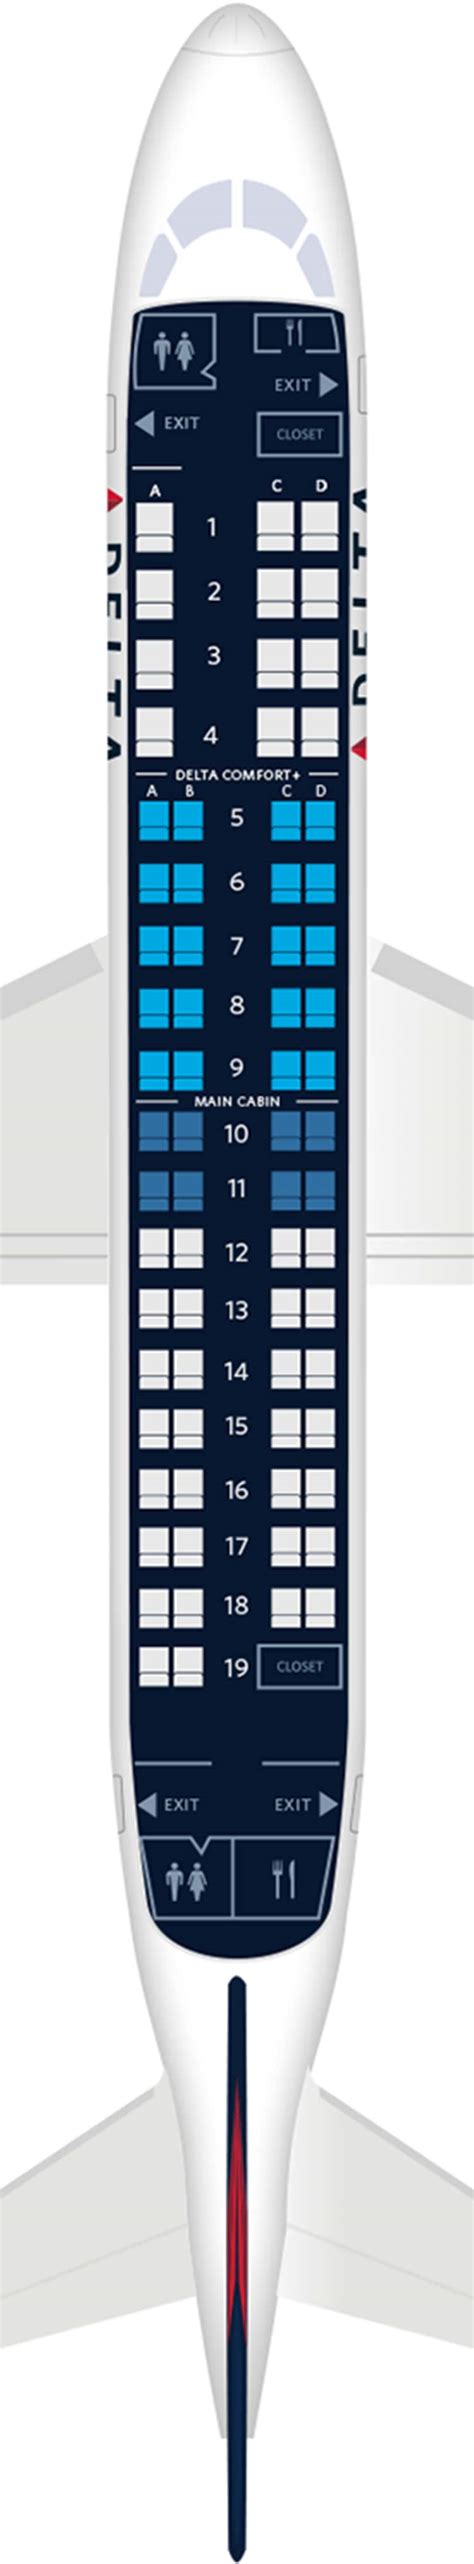 Embraer 175 . Embraer 190 . About the Embraer 190 . Seat map . Specifications . Embraer 195-E2 . Embraer 190. When you're travelling to Florence, Bilbao, or Dublin, you may fly with the Embraer 190. Learn everything you want to know. ... Would you like a bird's-eye view of our Embraer 190? With our interactive seat map, you can scroll .... 